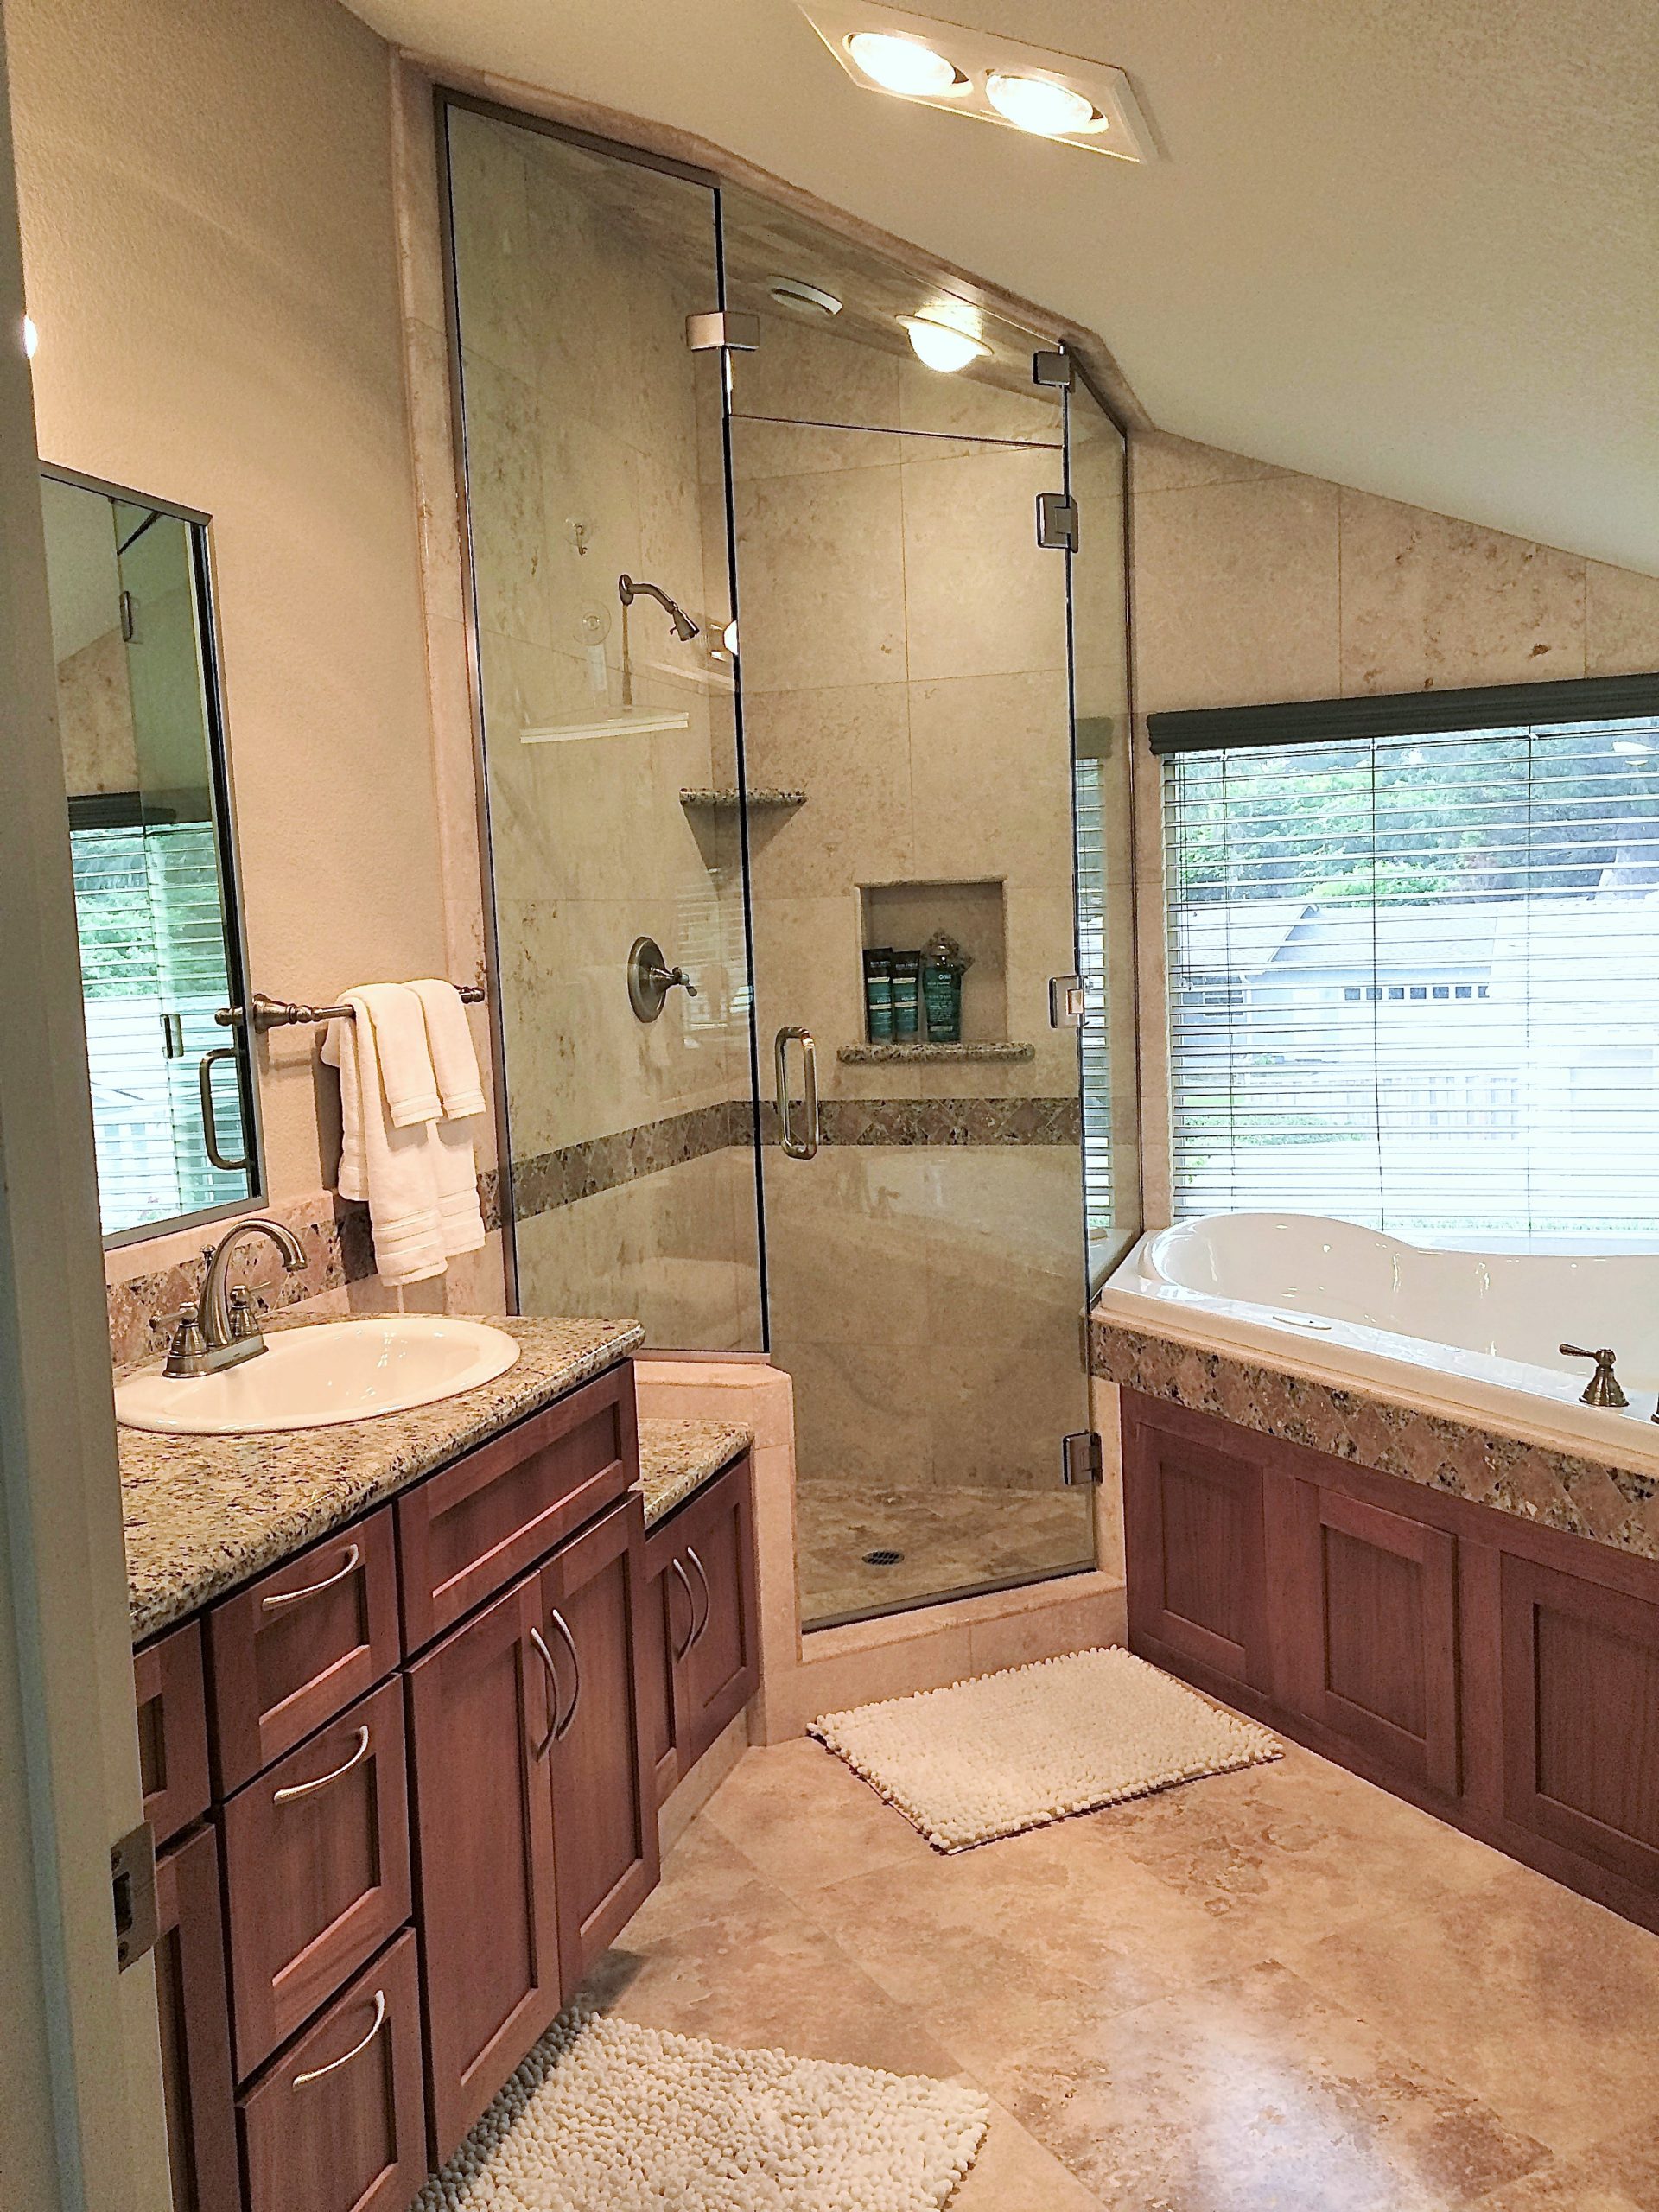 Photo of master bathroom with tile flooring and counters, modern glass shower and soaking bath